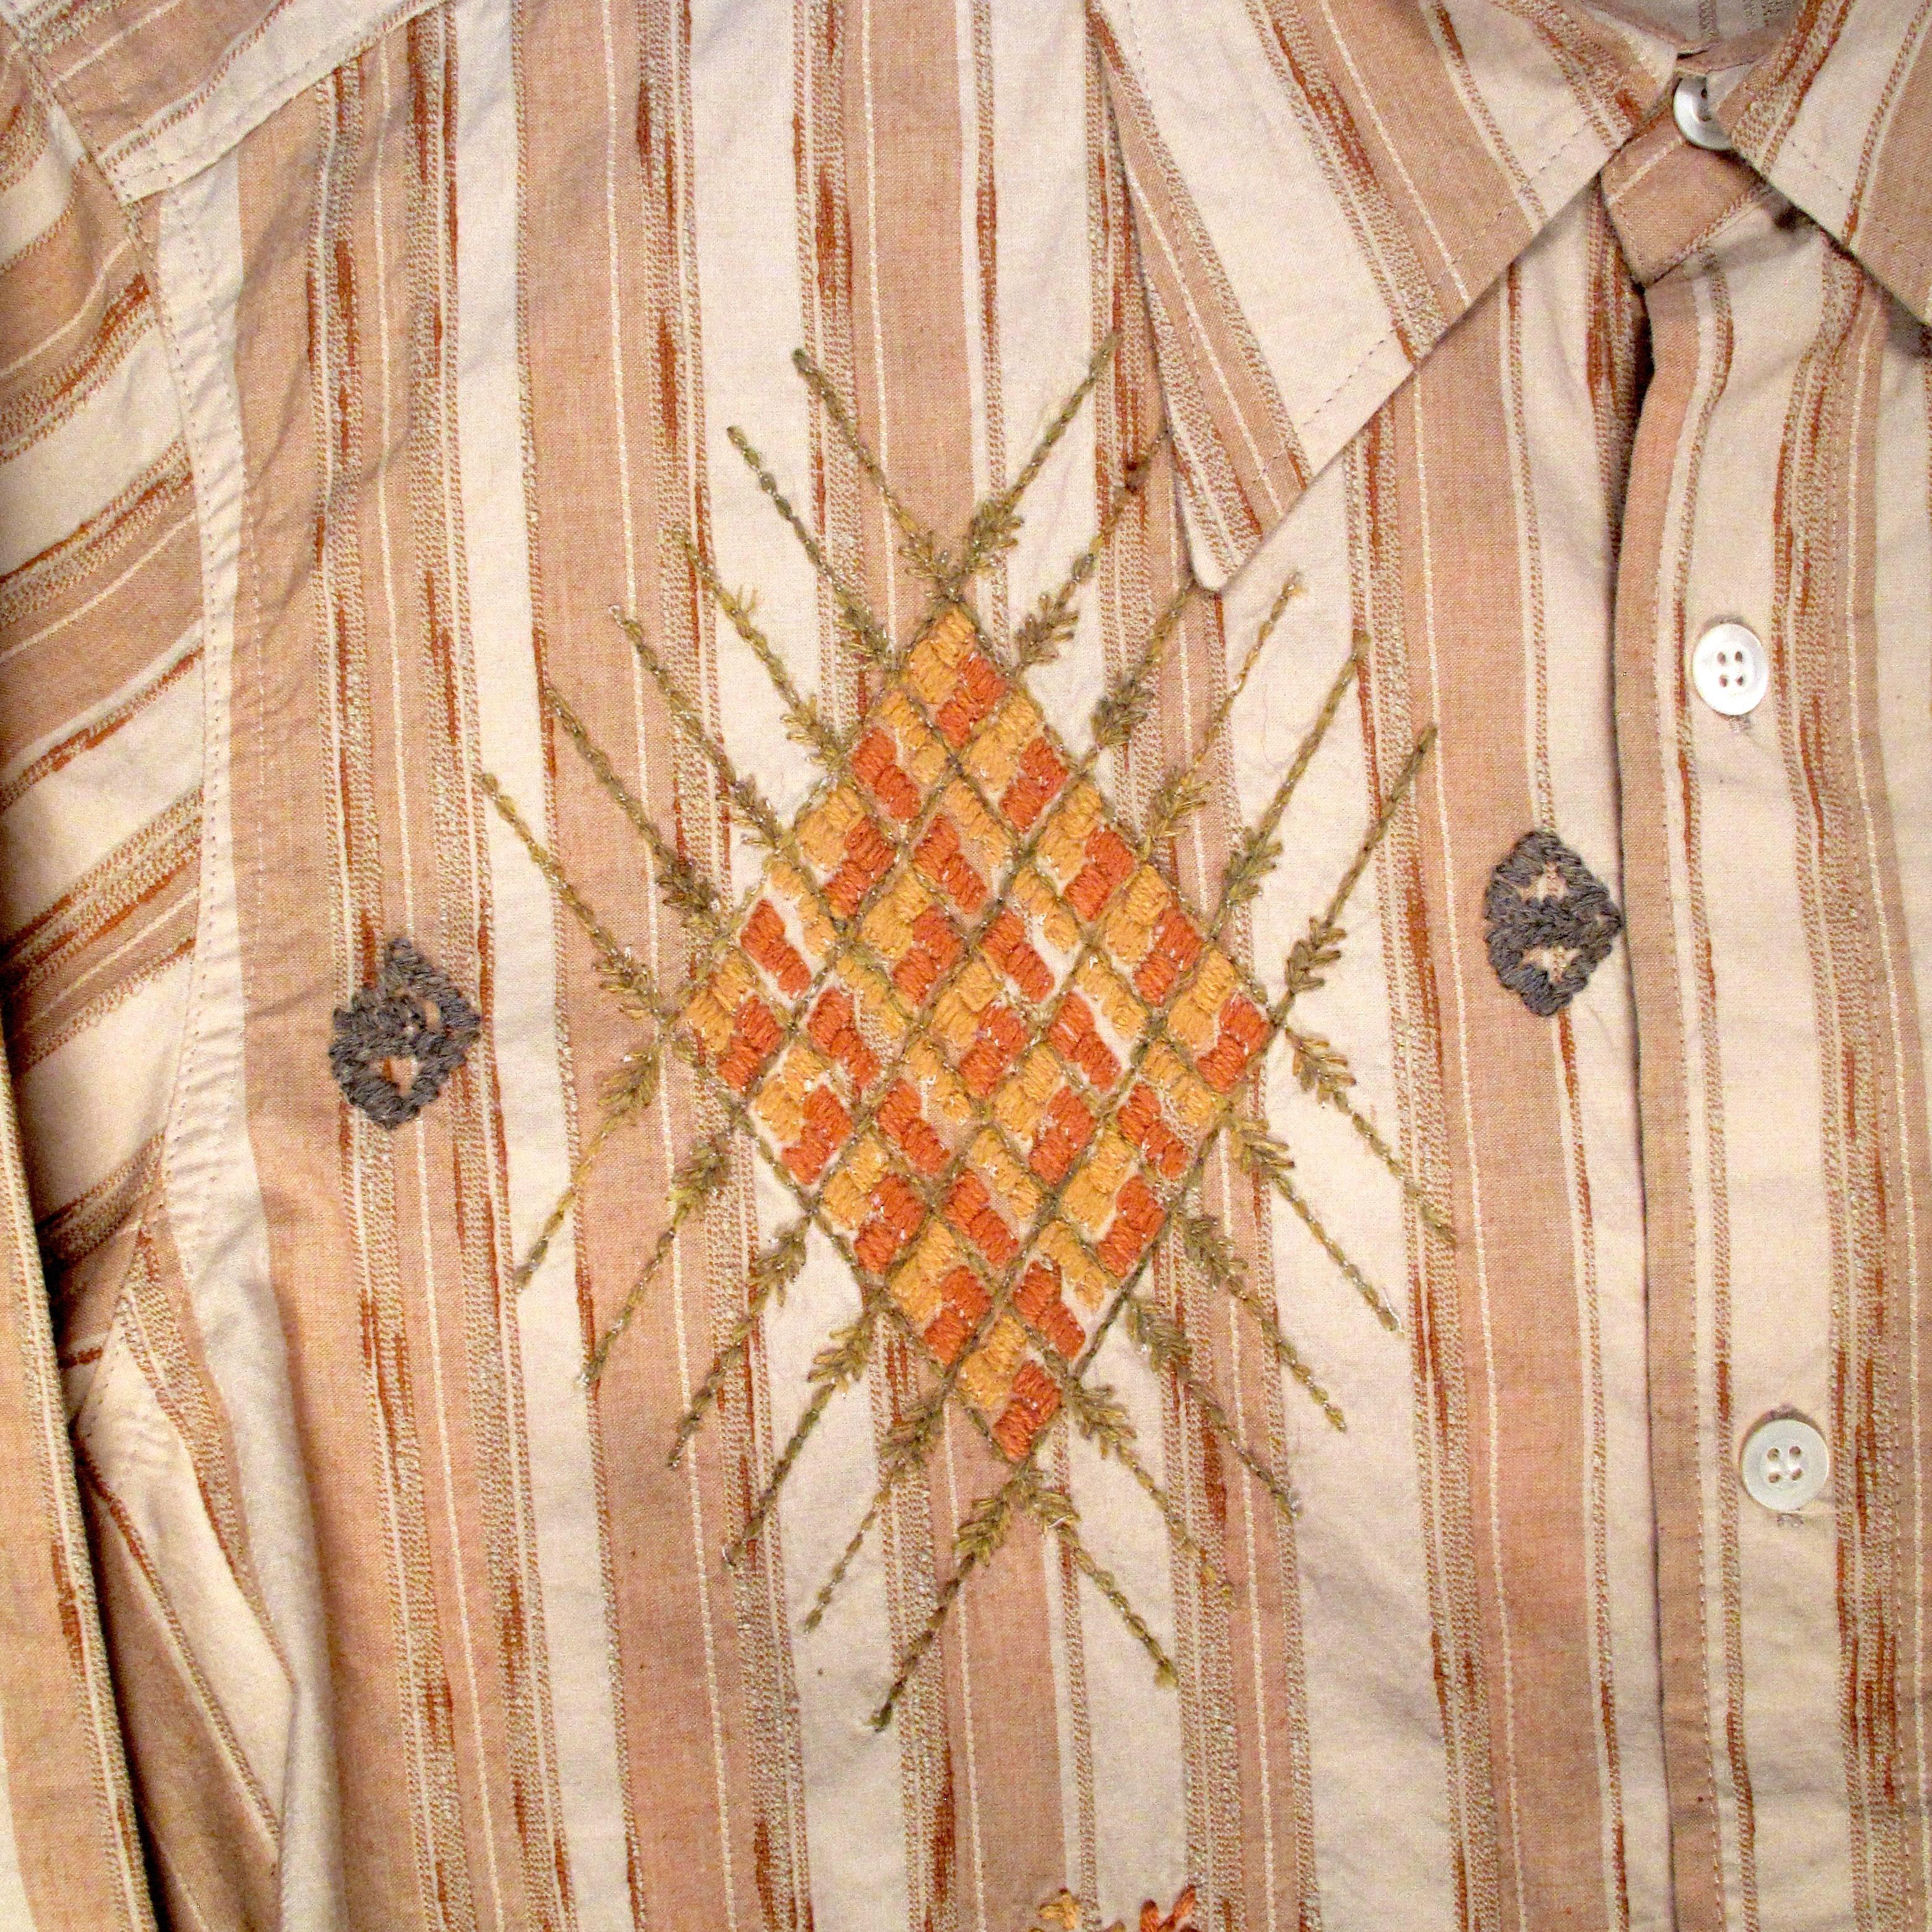 Dries Van Noten Shirt - Small - 48  - Embroidered Striped Button Up Tan 3